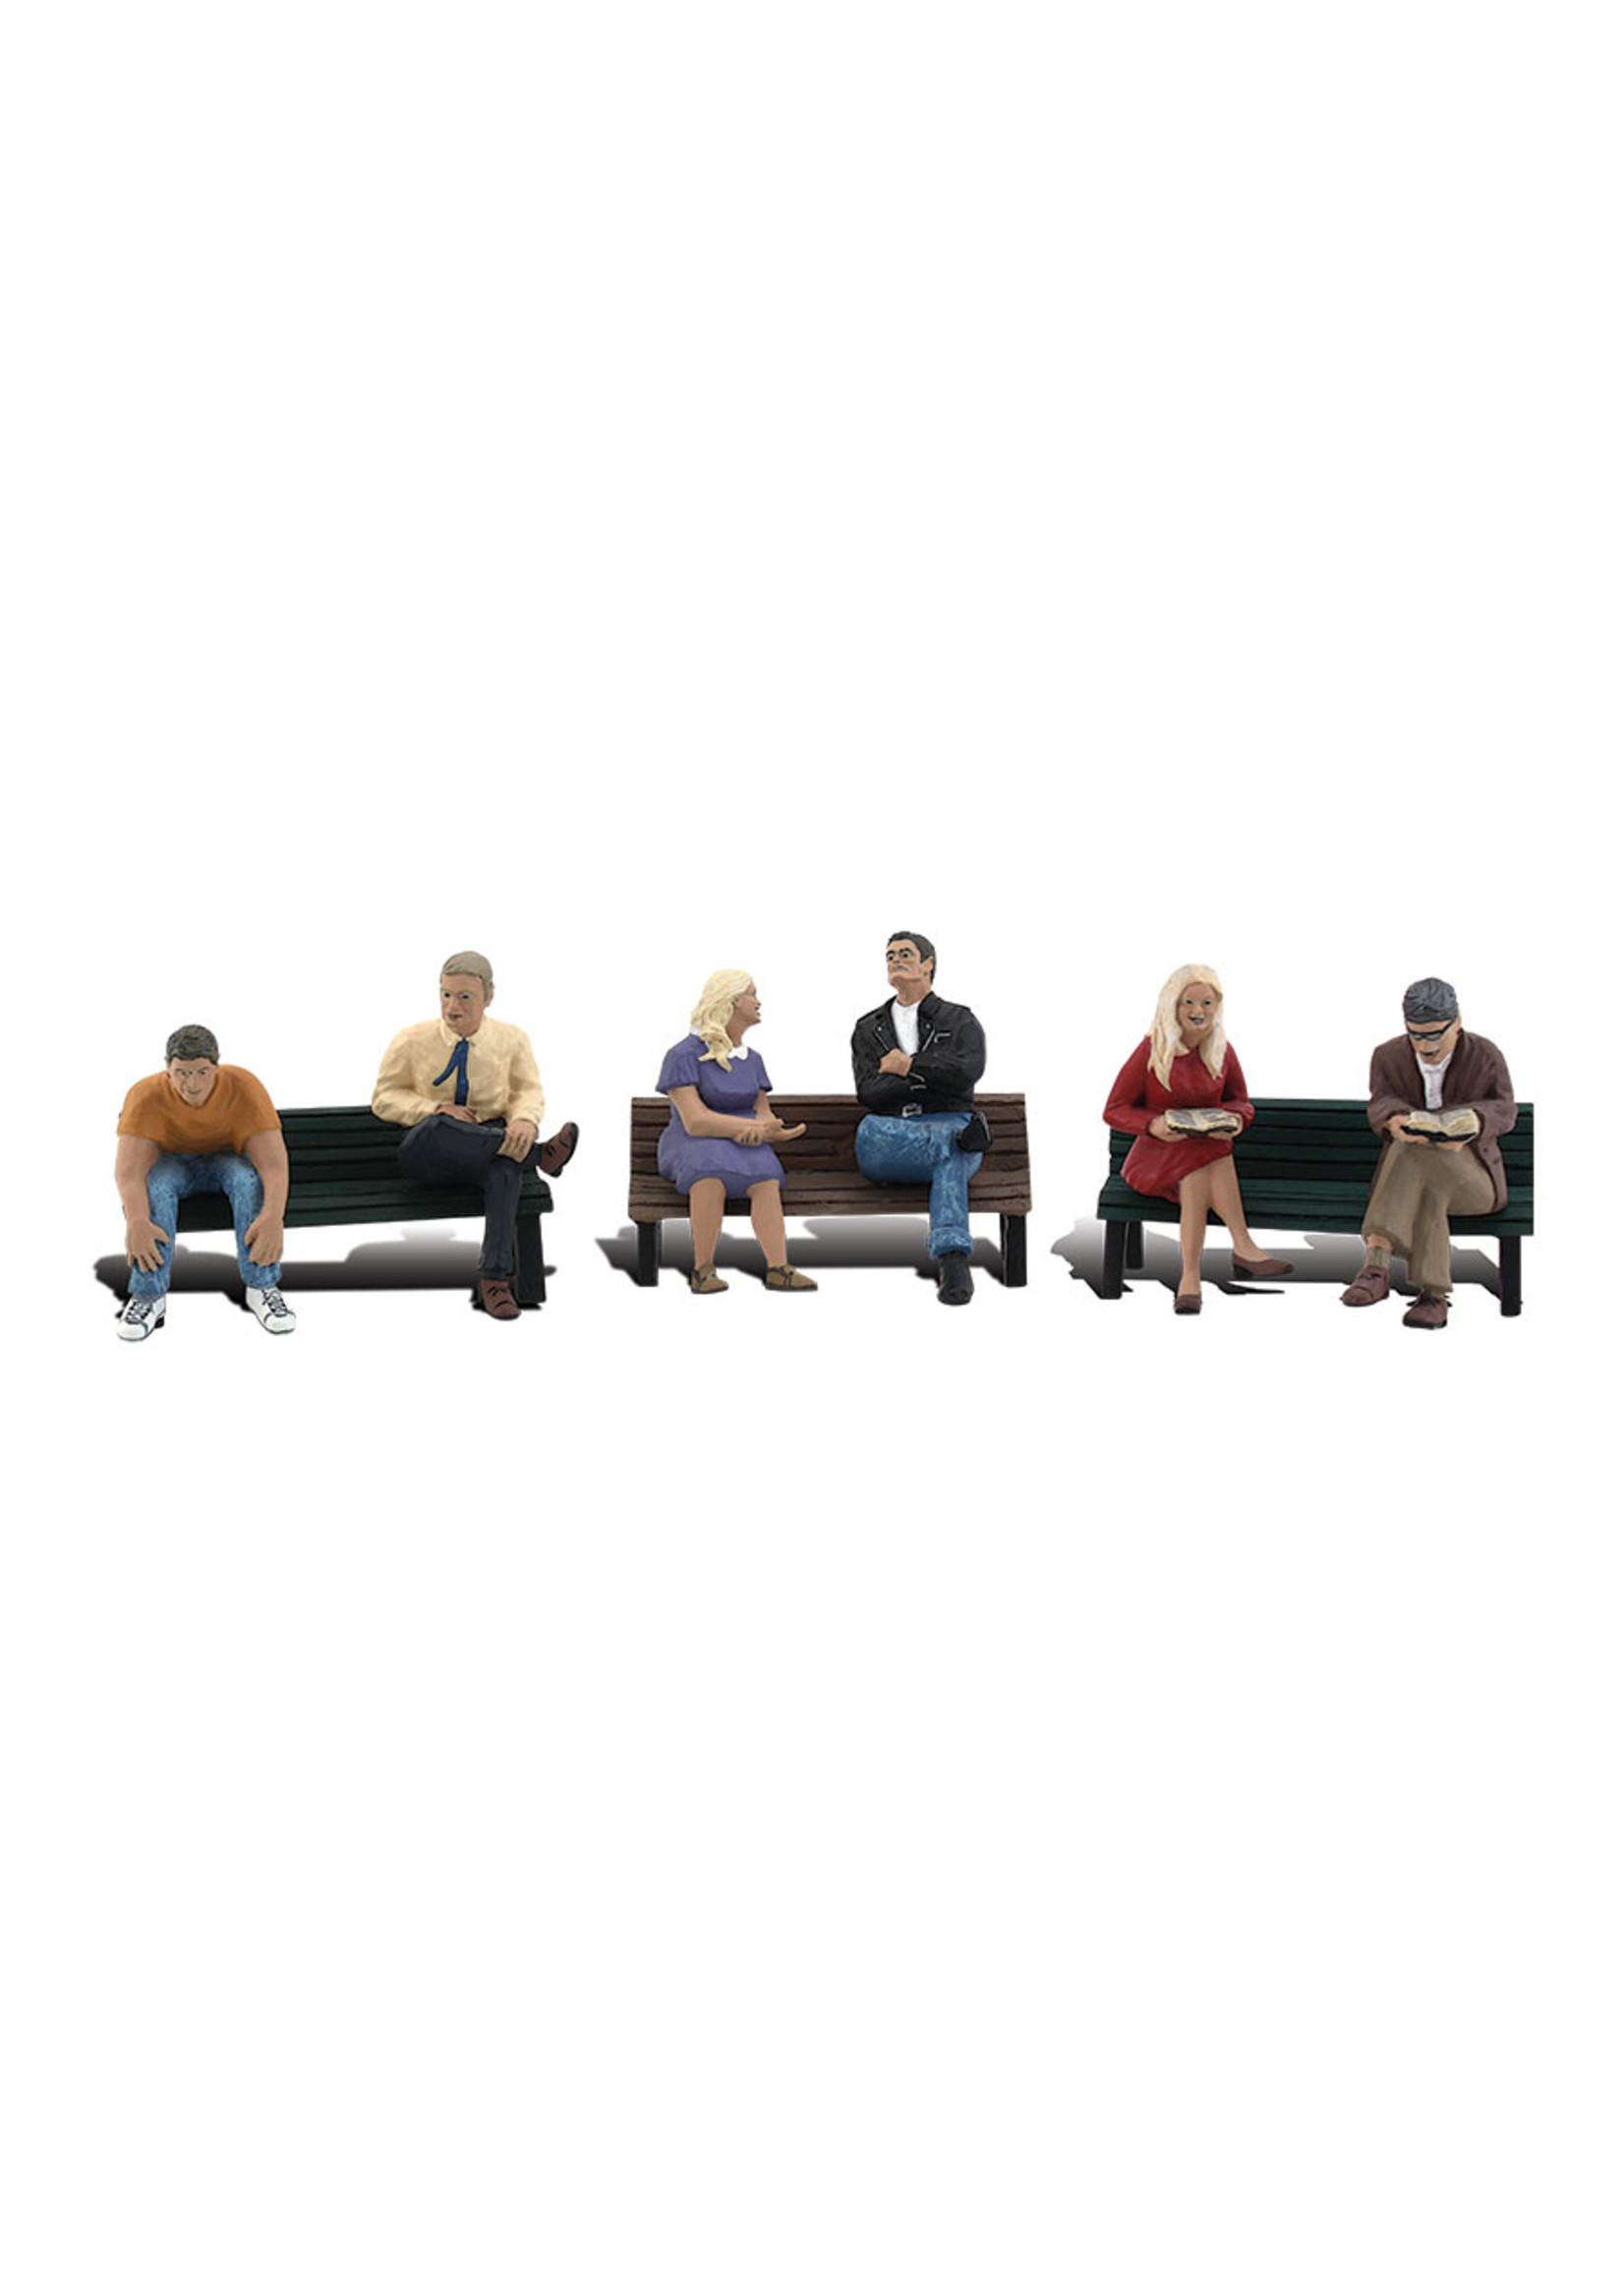 Woodland Scenics A2206 - N Scale People on Benches